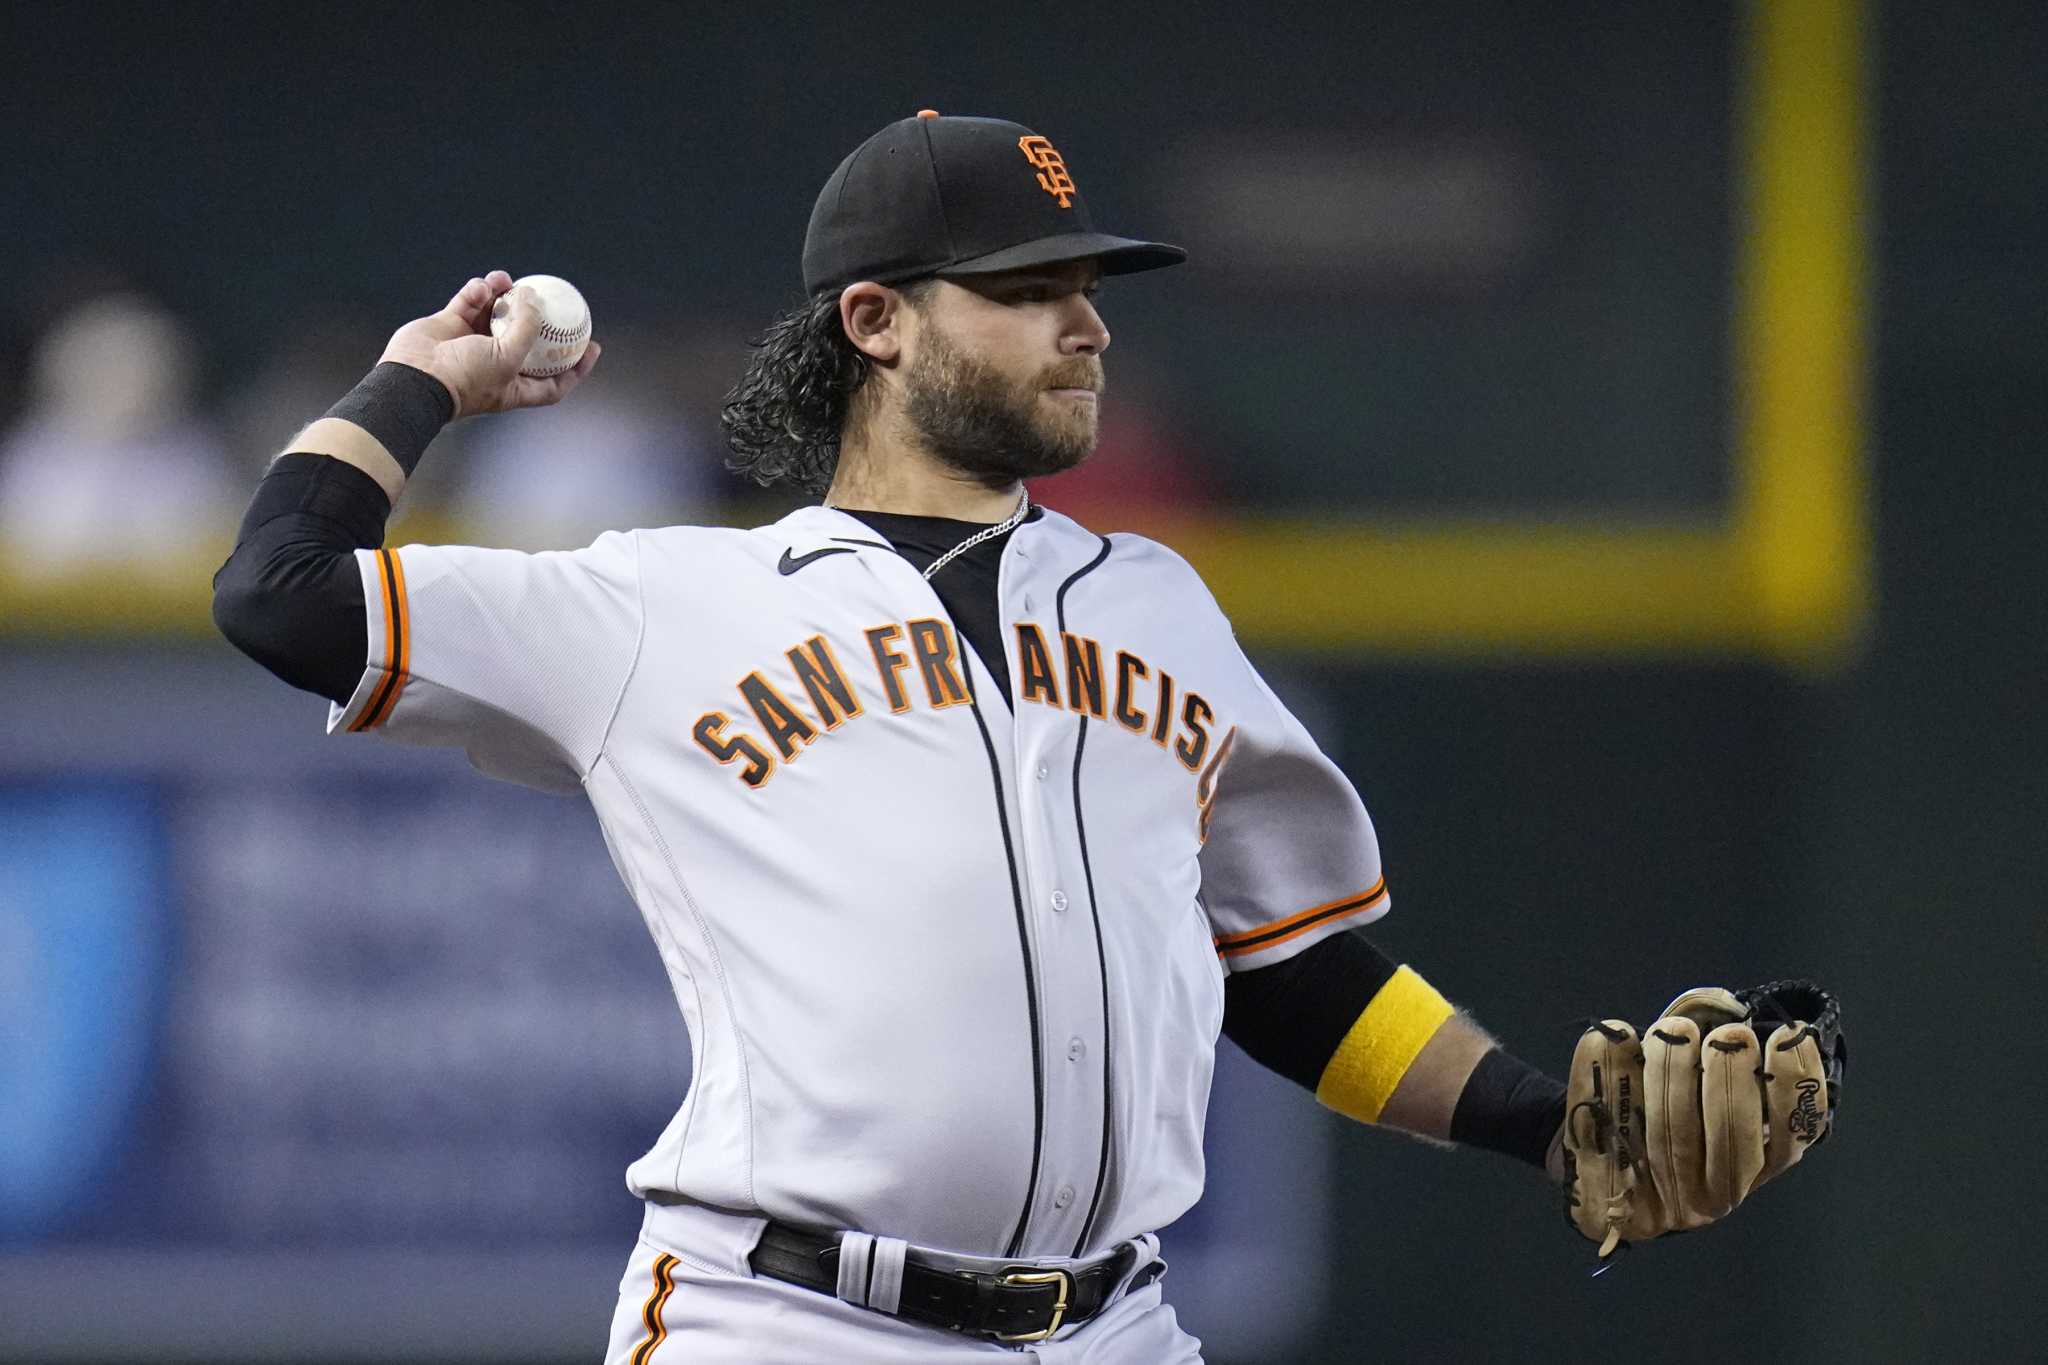 Giants send Brandon Crawford to IL, call up Marco Luciano